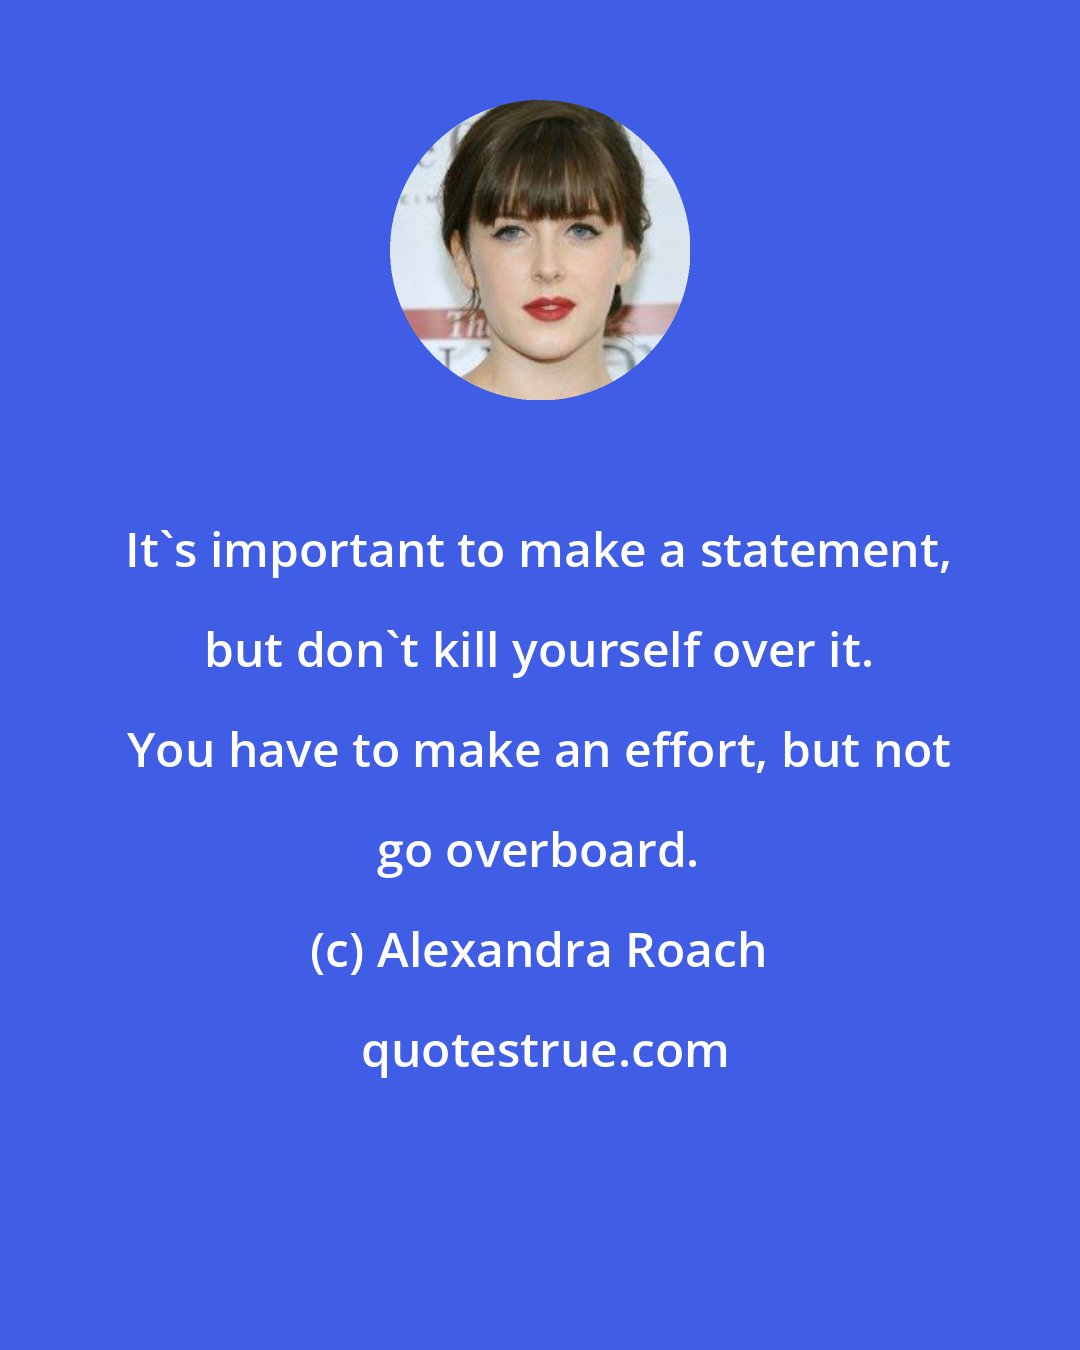 Alexandra Roach: It's important to make a statement, but don't kill yourself over it. You have to make an effort, but not go overboard.